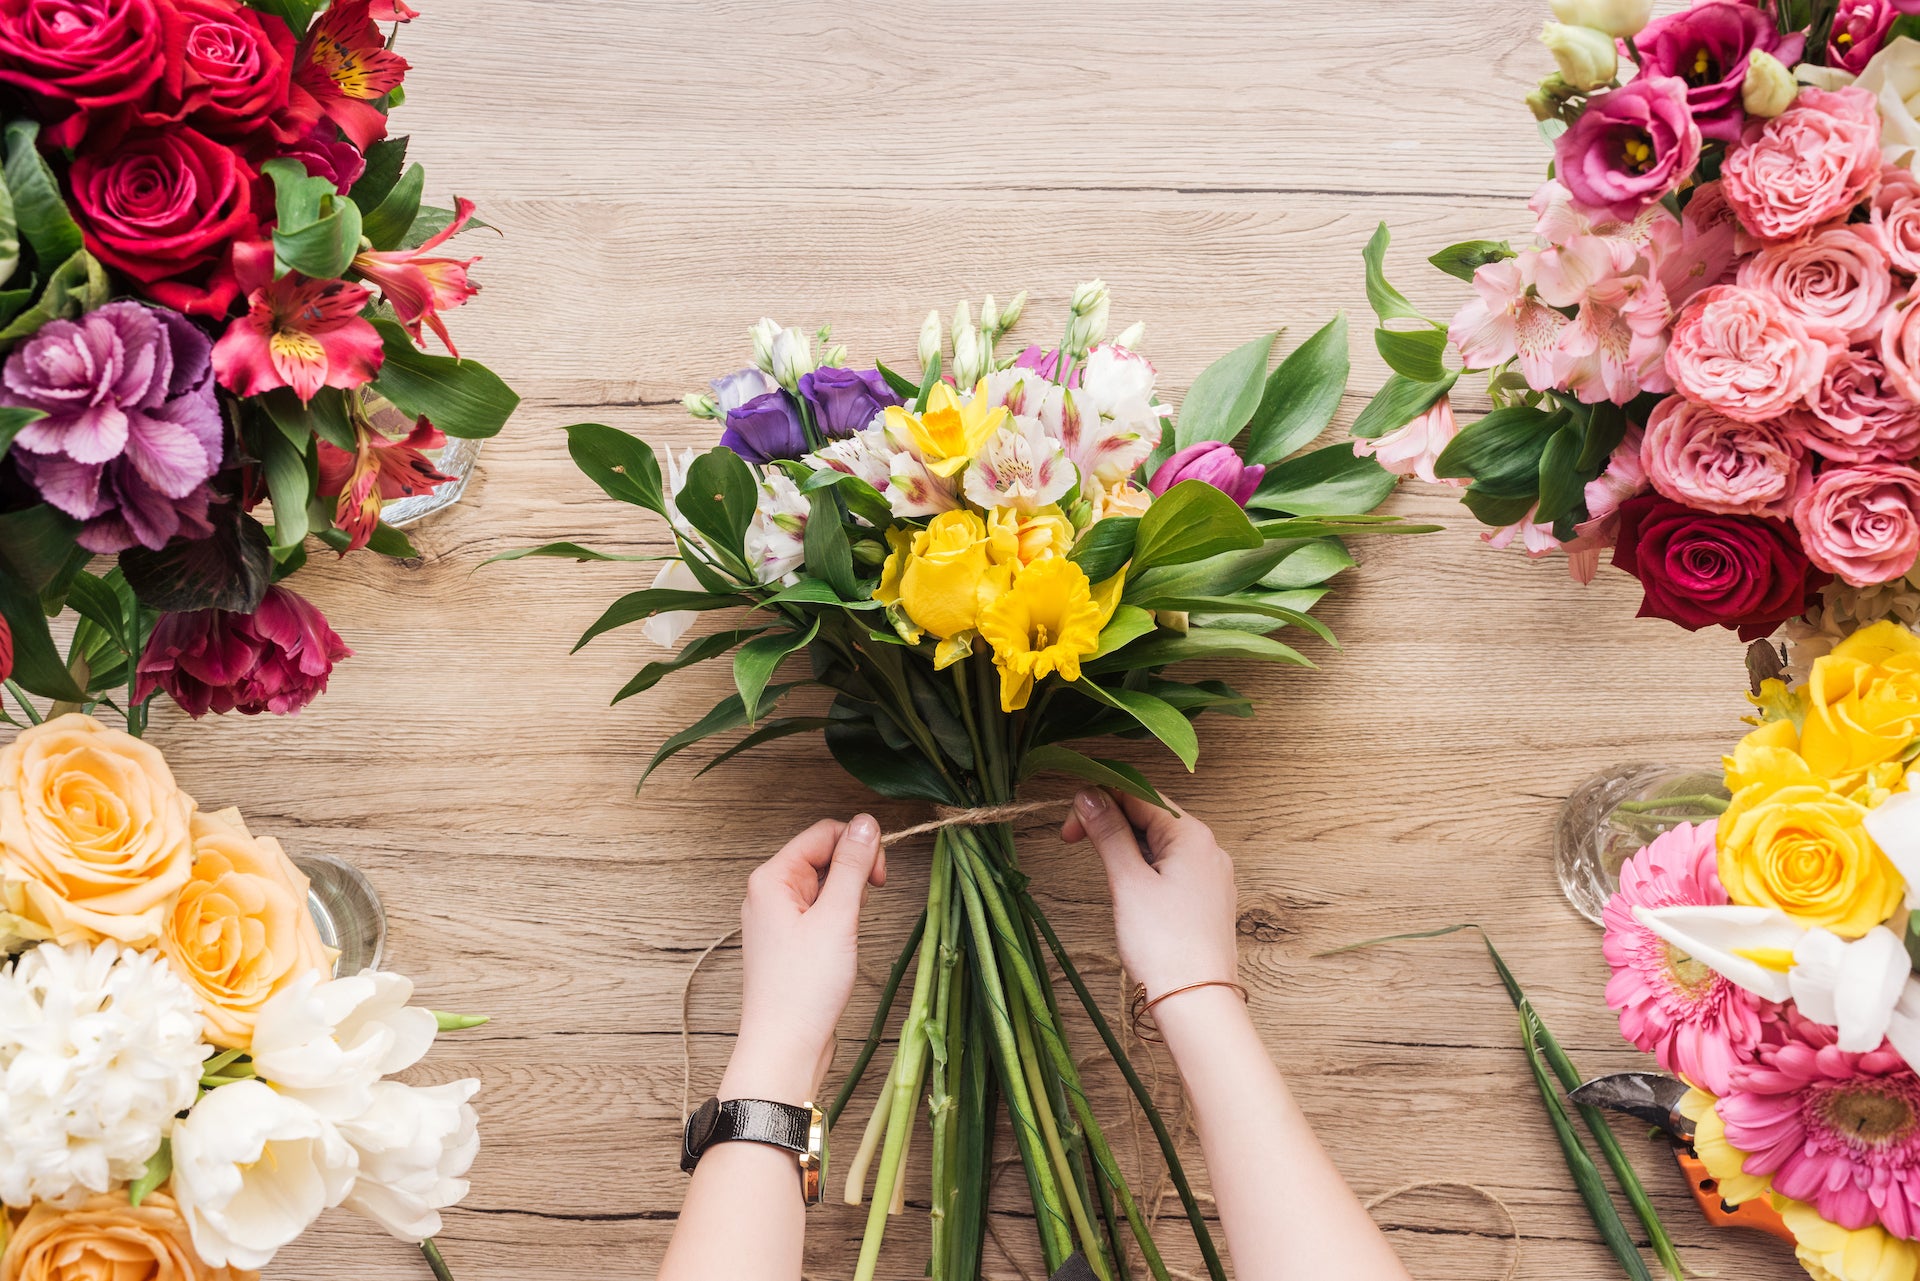 Flower Symbolism: What Do They Mean?